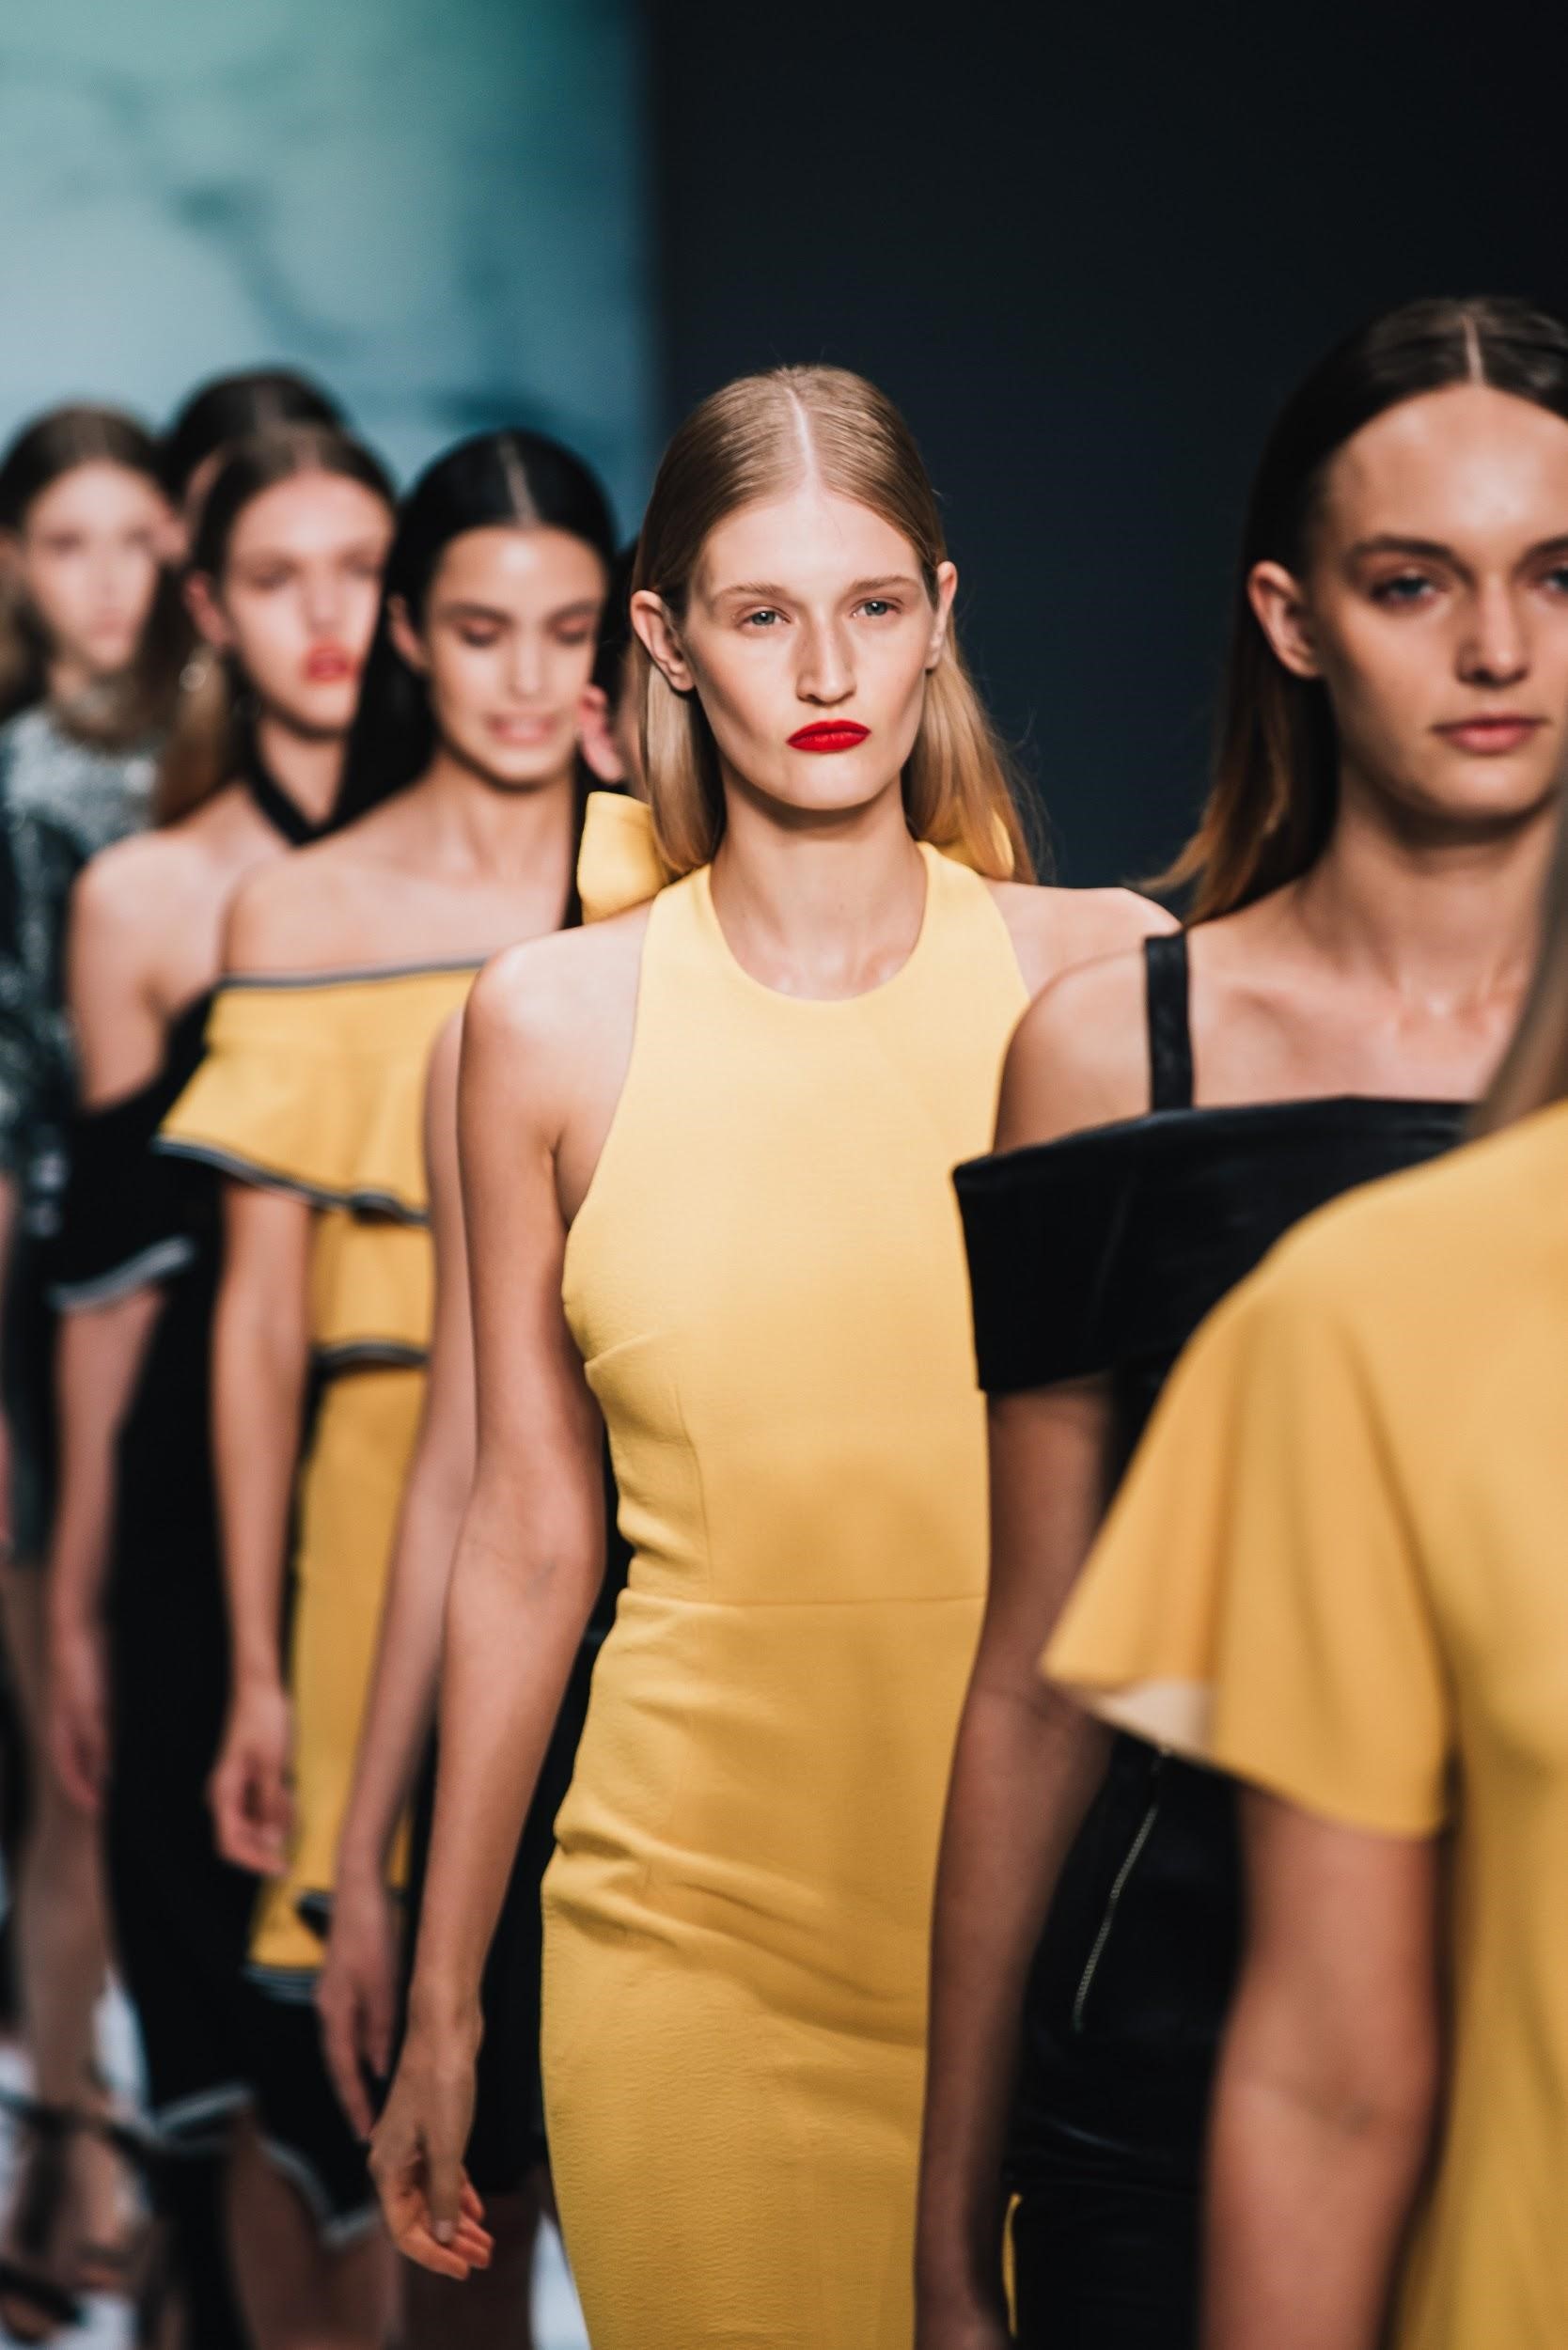 How to Prepare For a Model Casting Call Leave a Lasting Impression